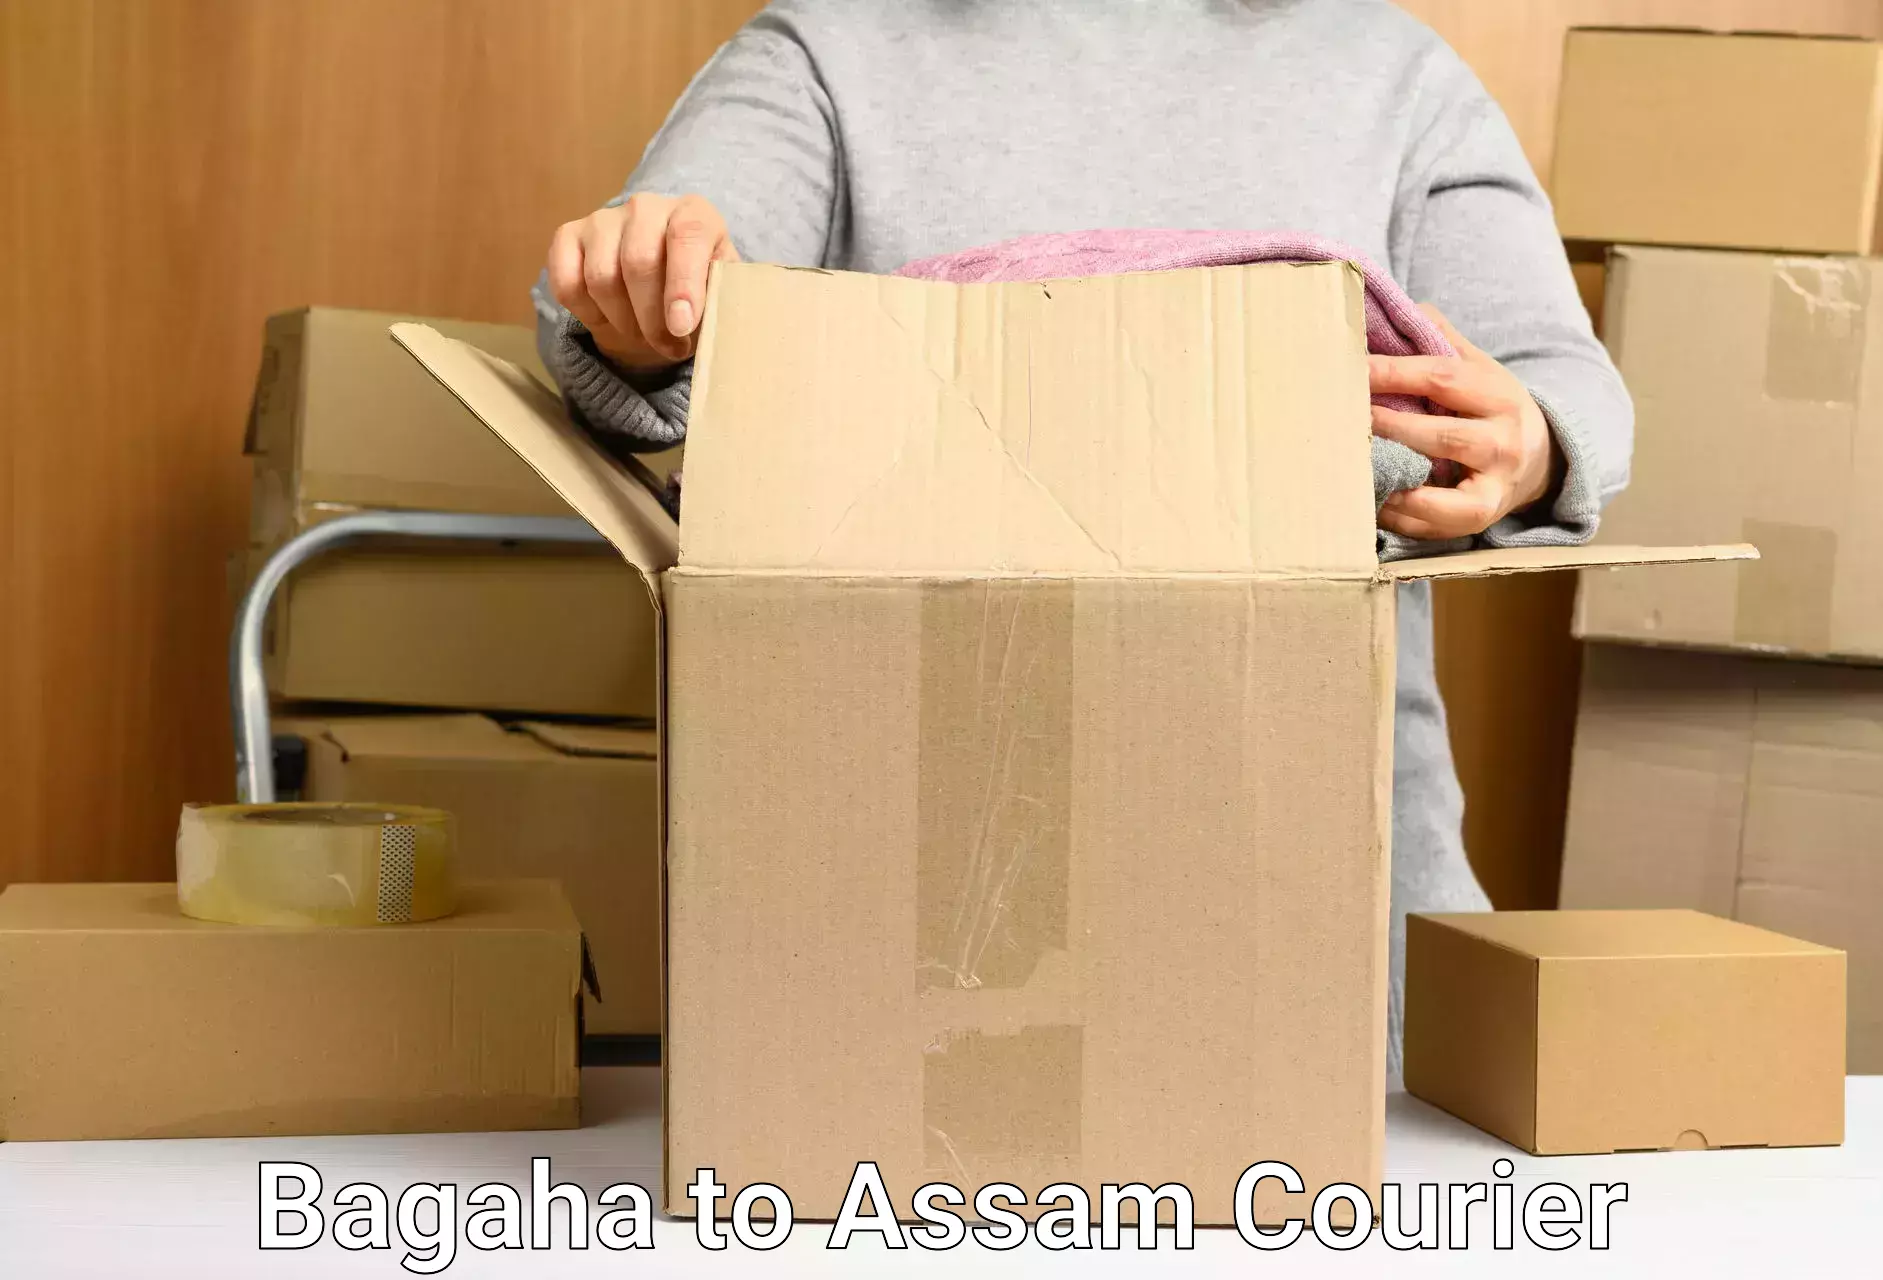 Local delivery service Bagaha to Assam